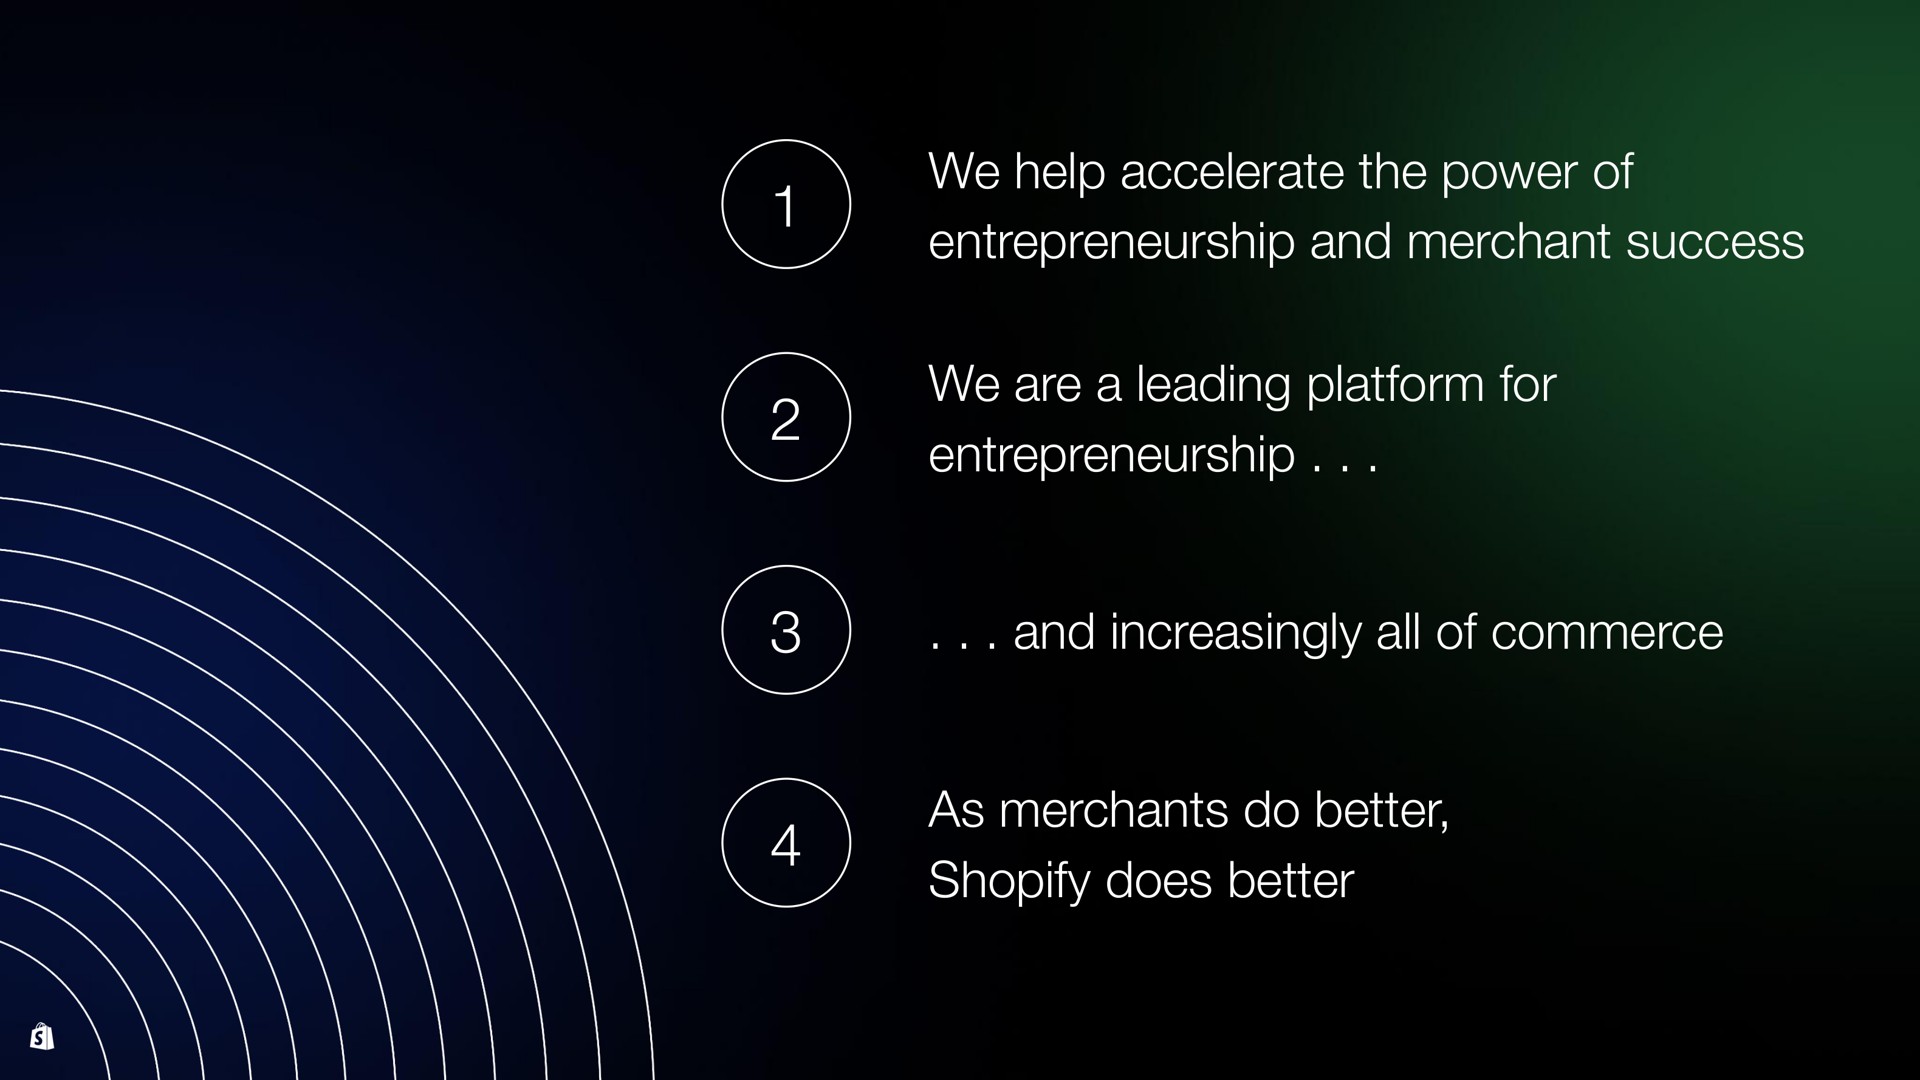 we help accelerate the power of entrepreneurship and merchant success we are a leading platform for entrepreneurship and increasingly all of commerce as merchants do better does better | Shopify